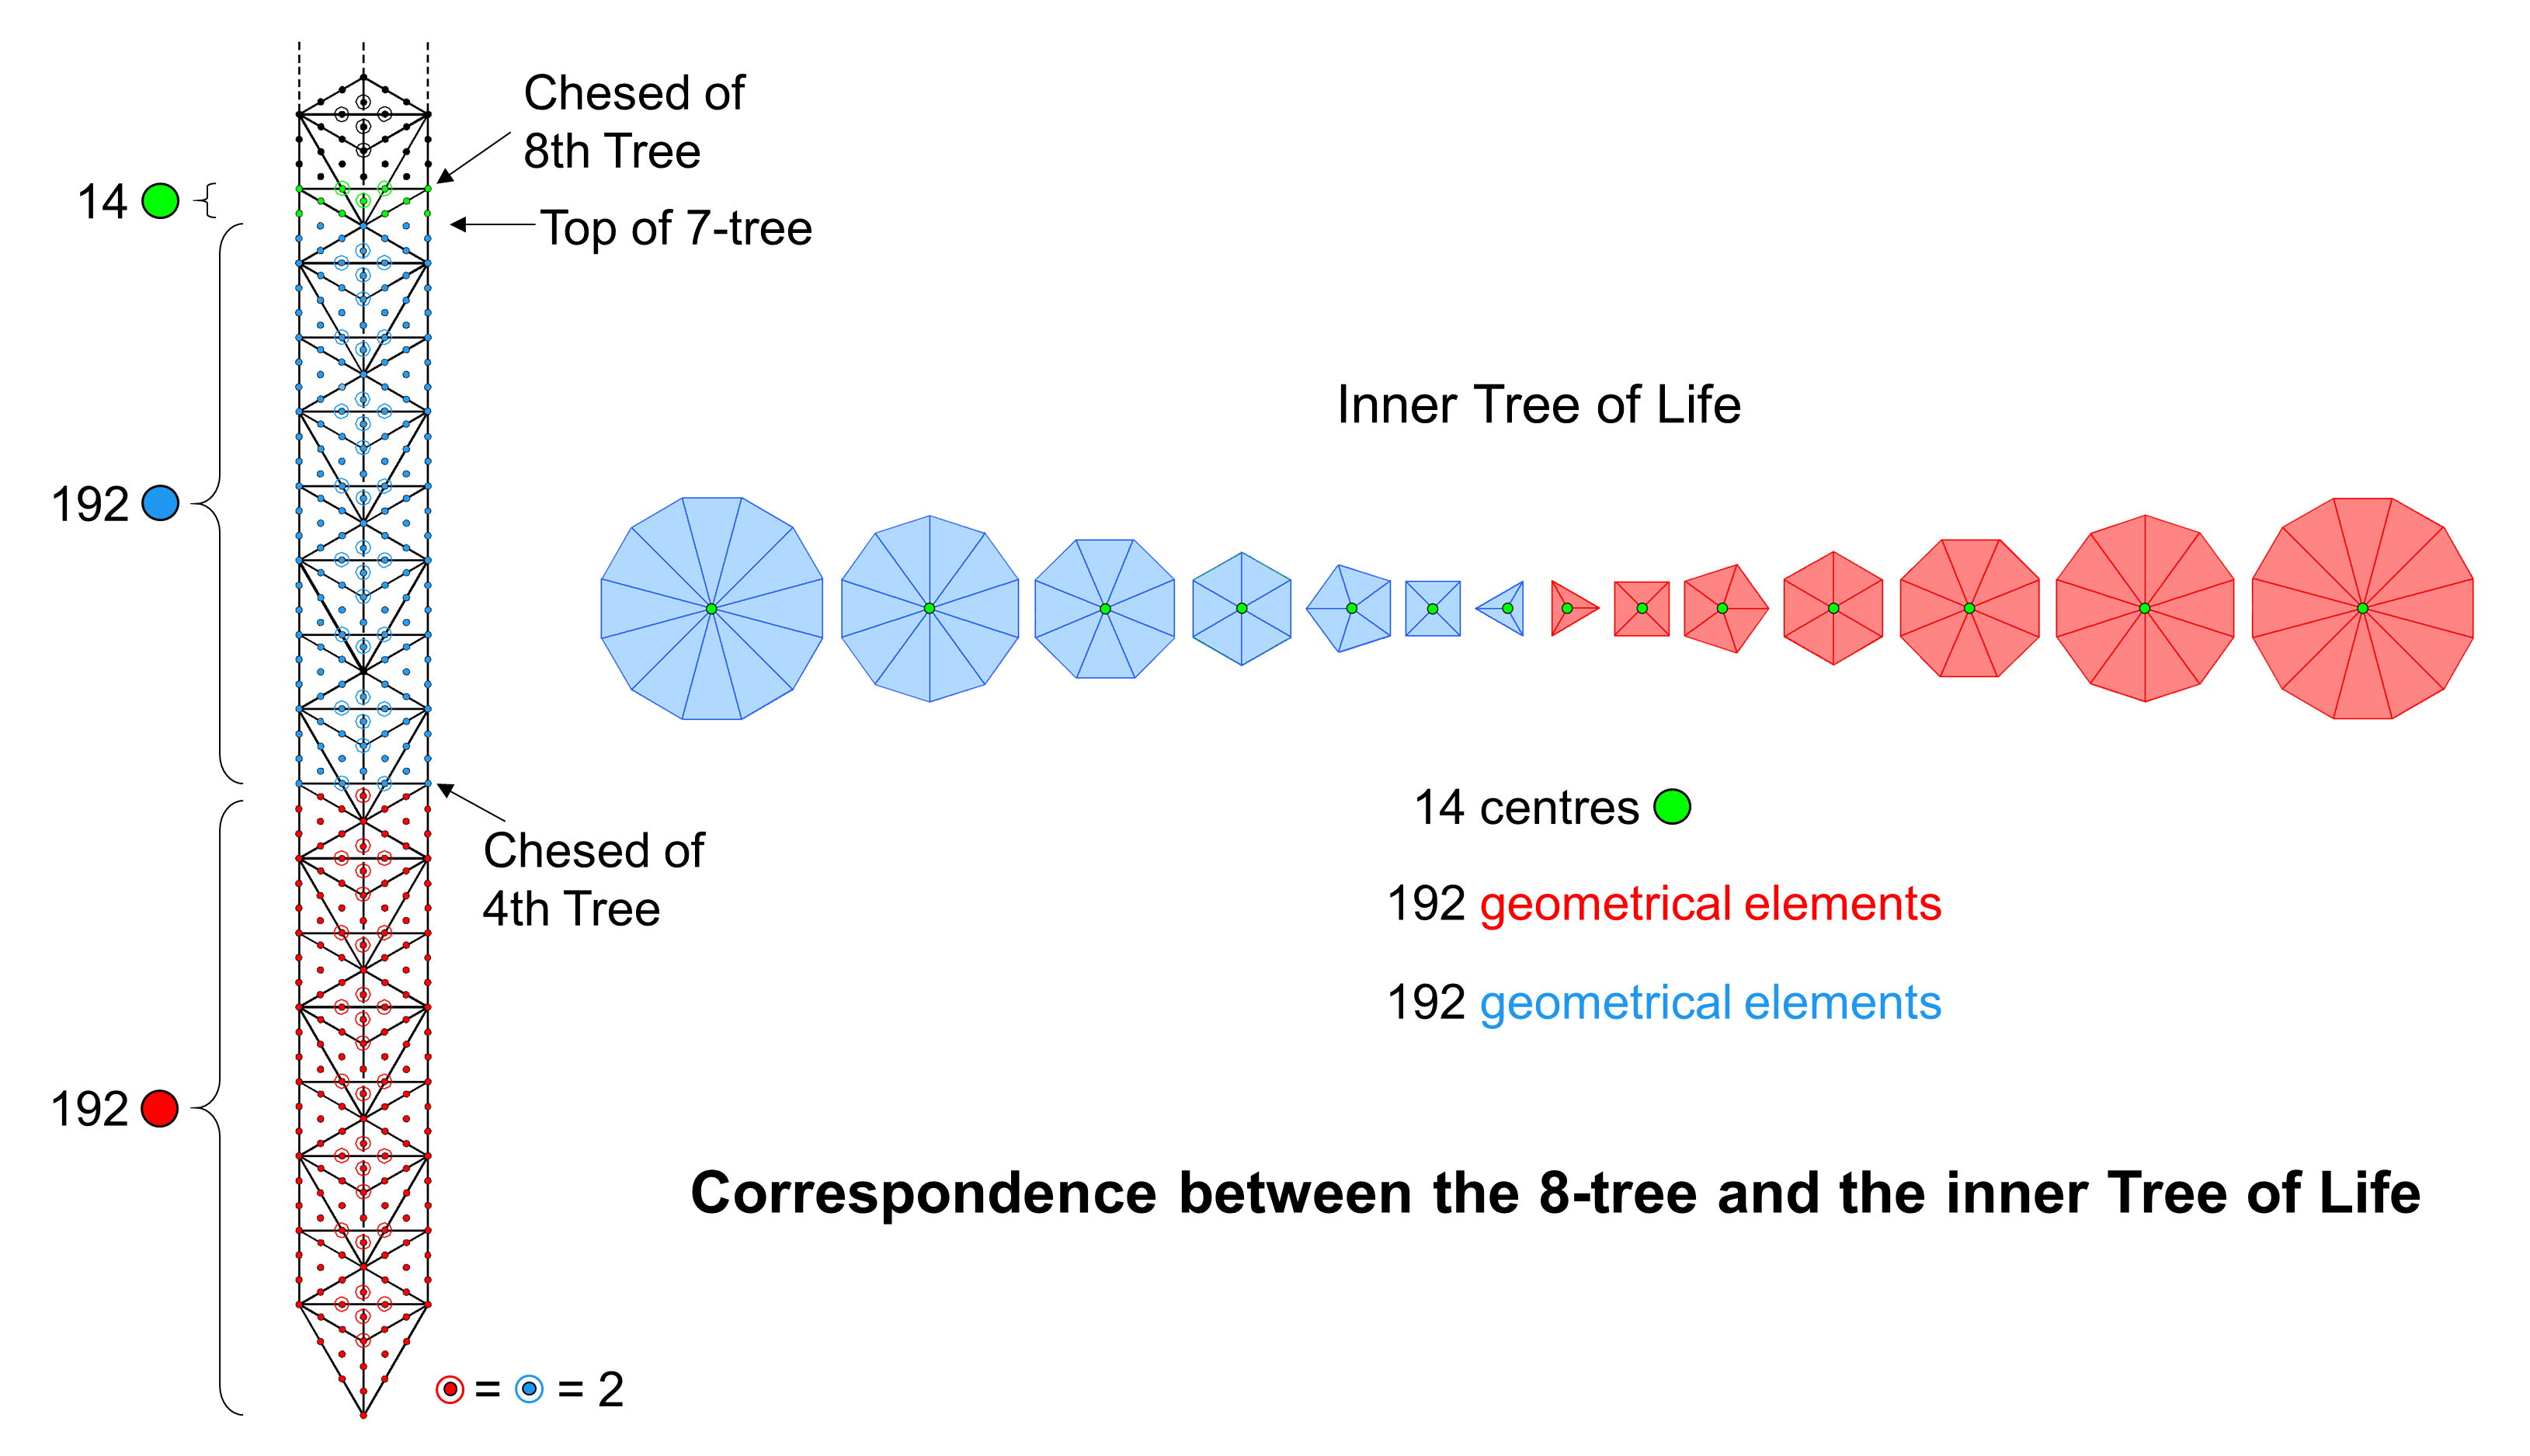 Isomorphism between the 8-tree and the inner Tree of Life